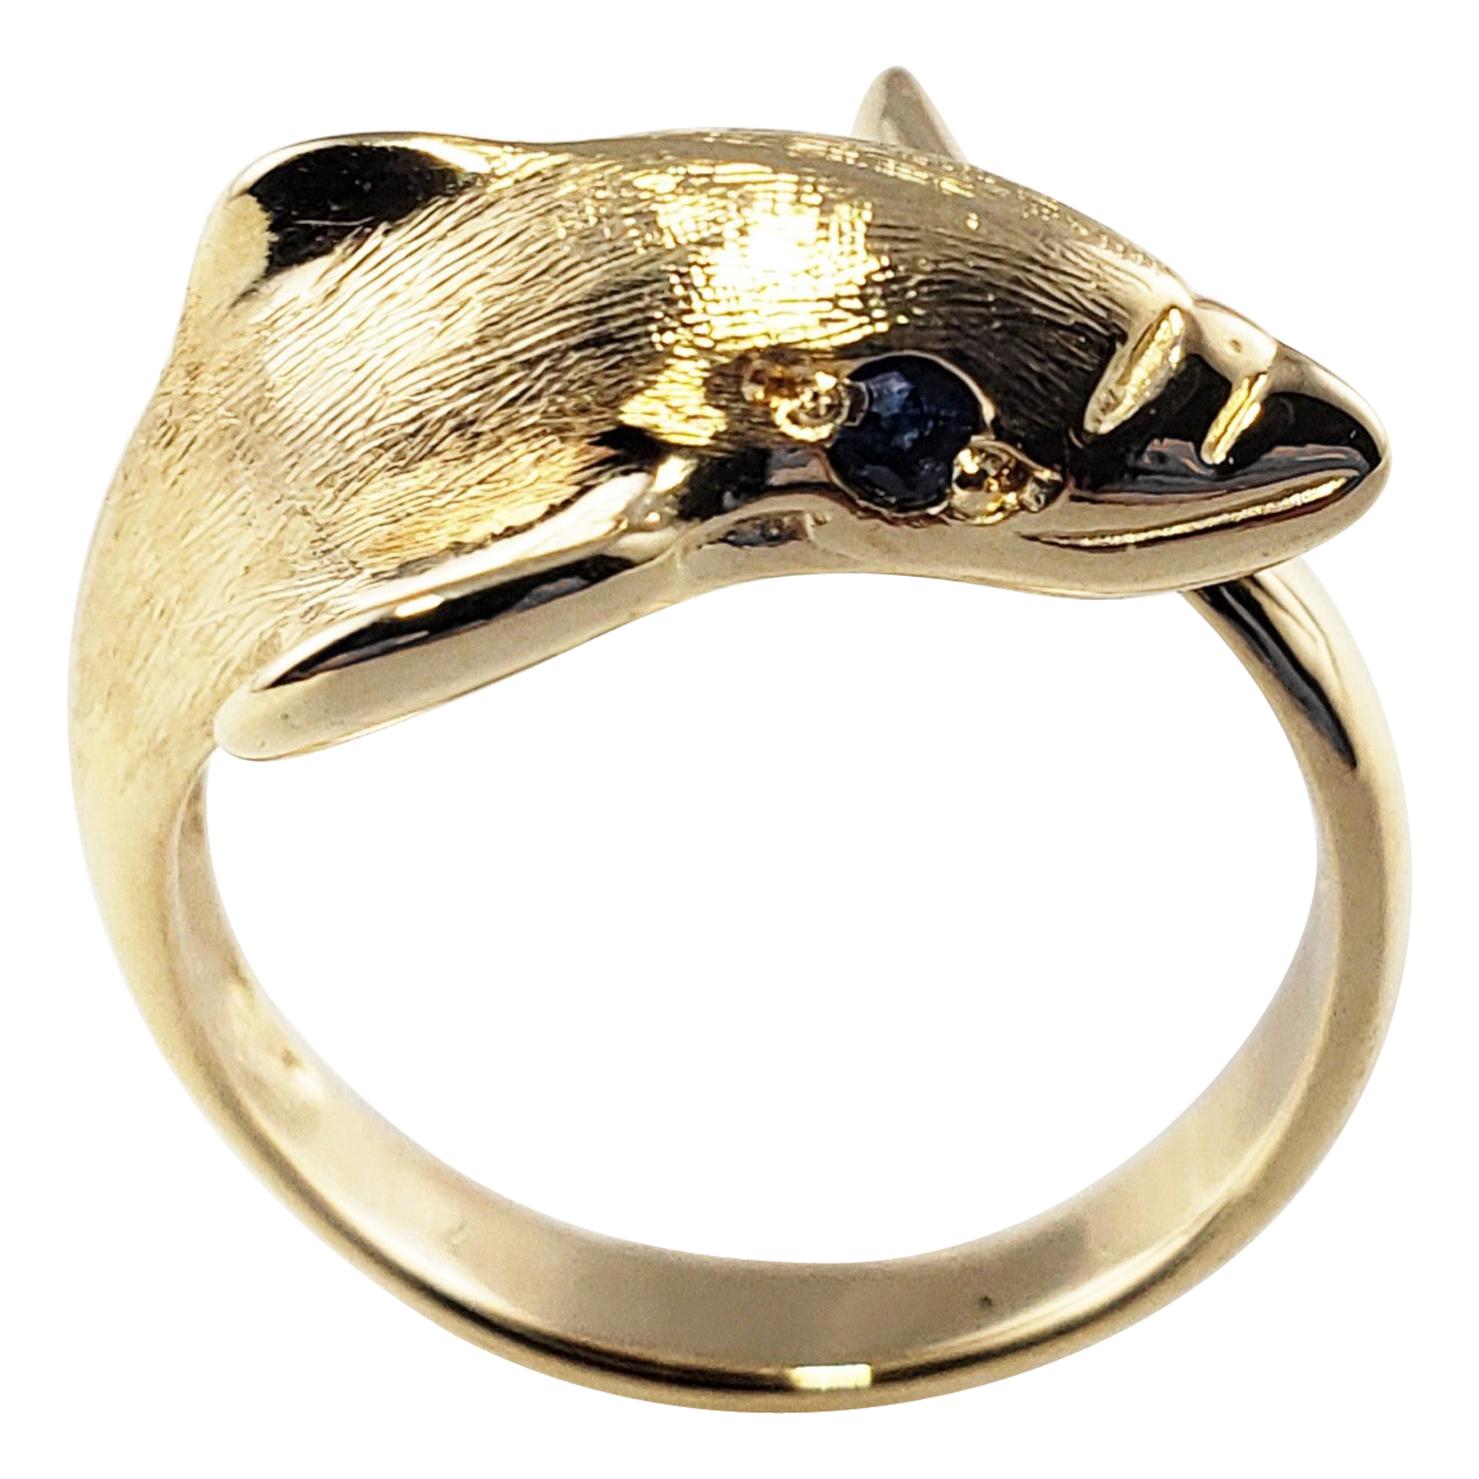 Details about   Jewelco London Ladies Solid 9ct Yellow Gold Dolphin Wrap Ring 